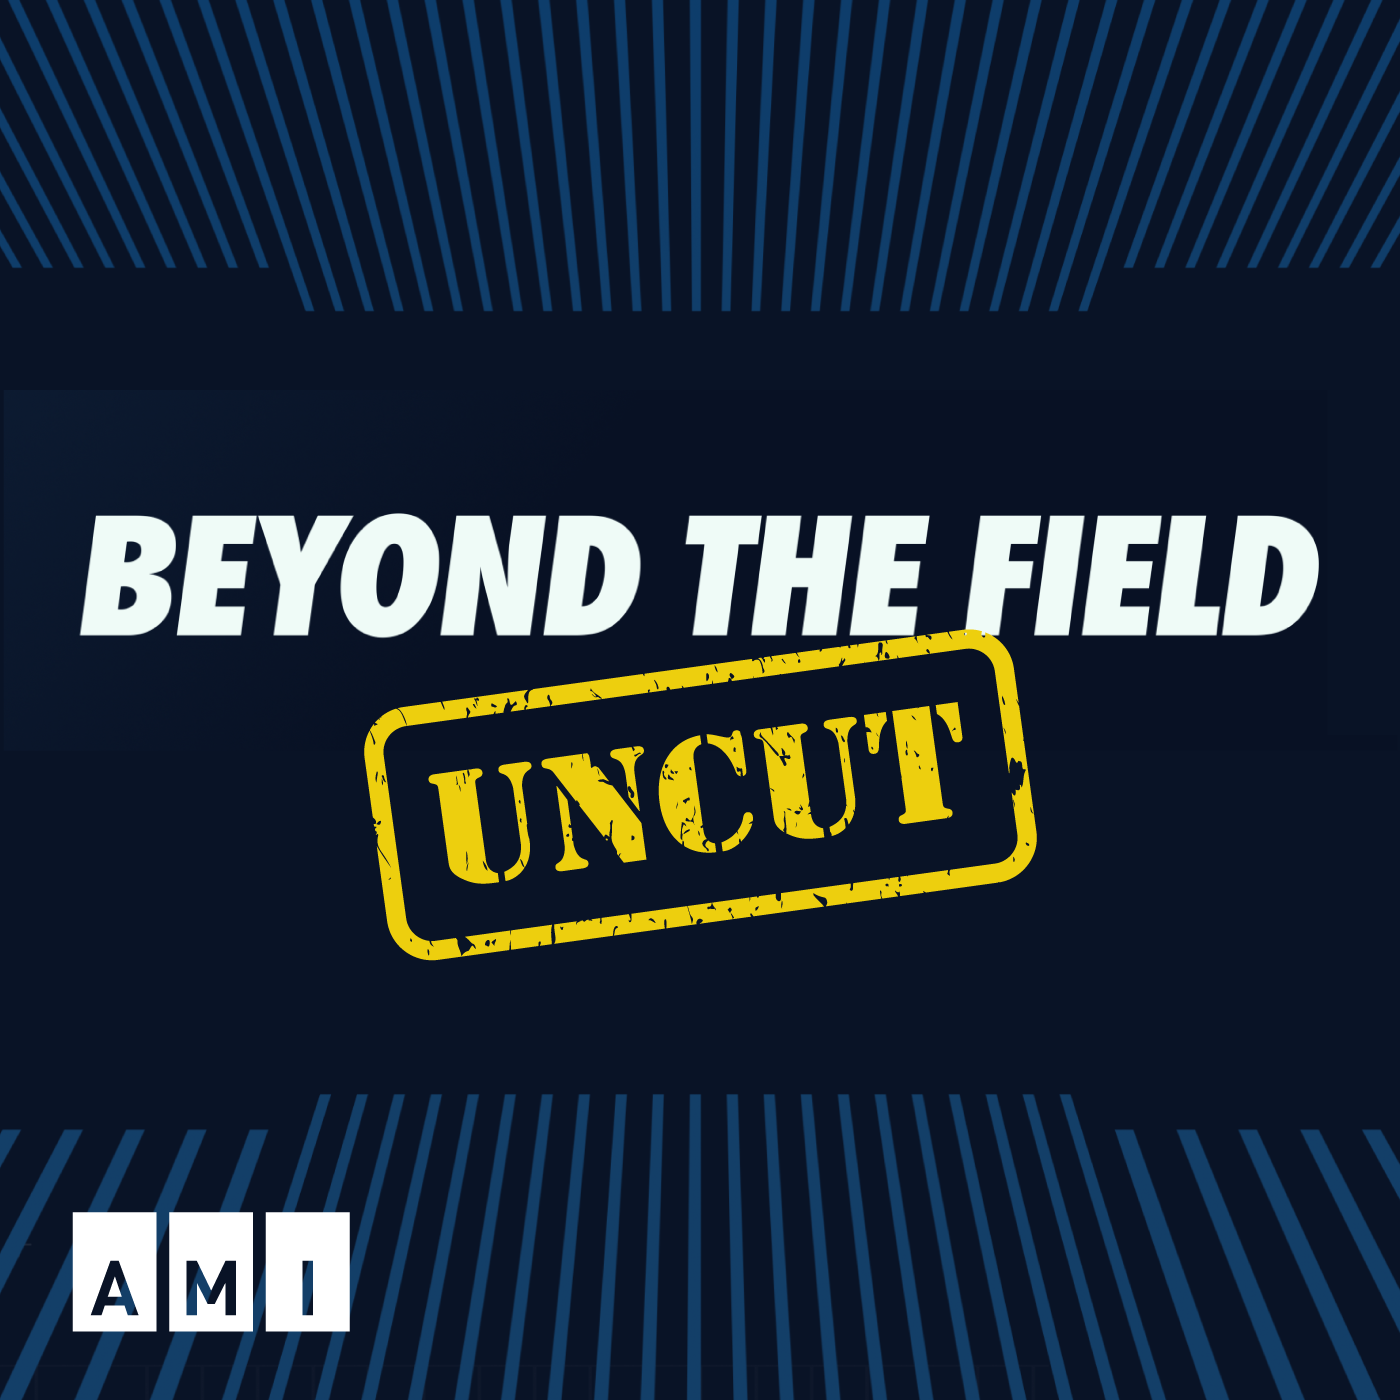 The Beyond the Field: Uncut logo